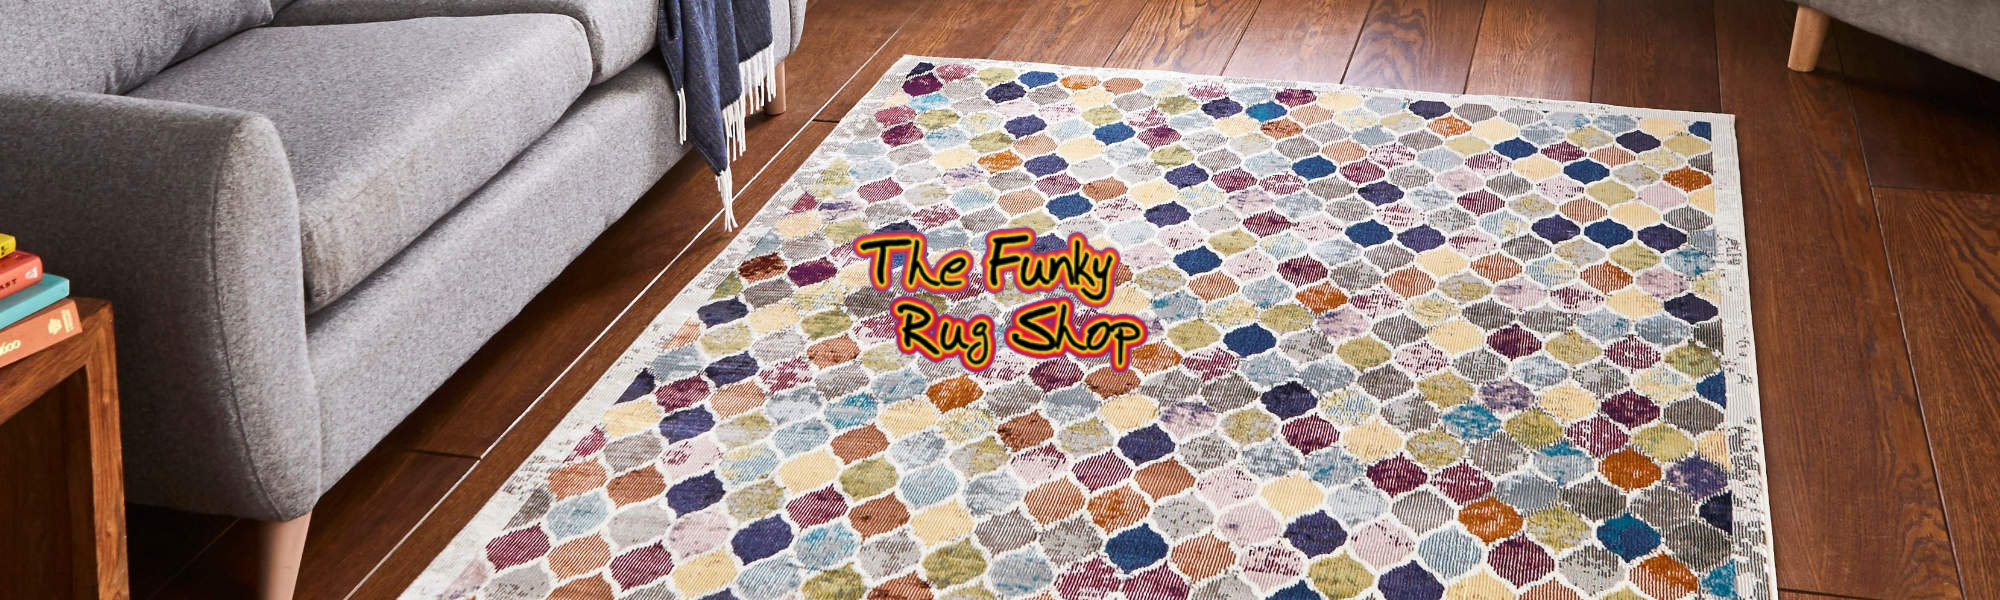 The Funky Rug Shop